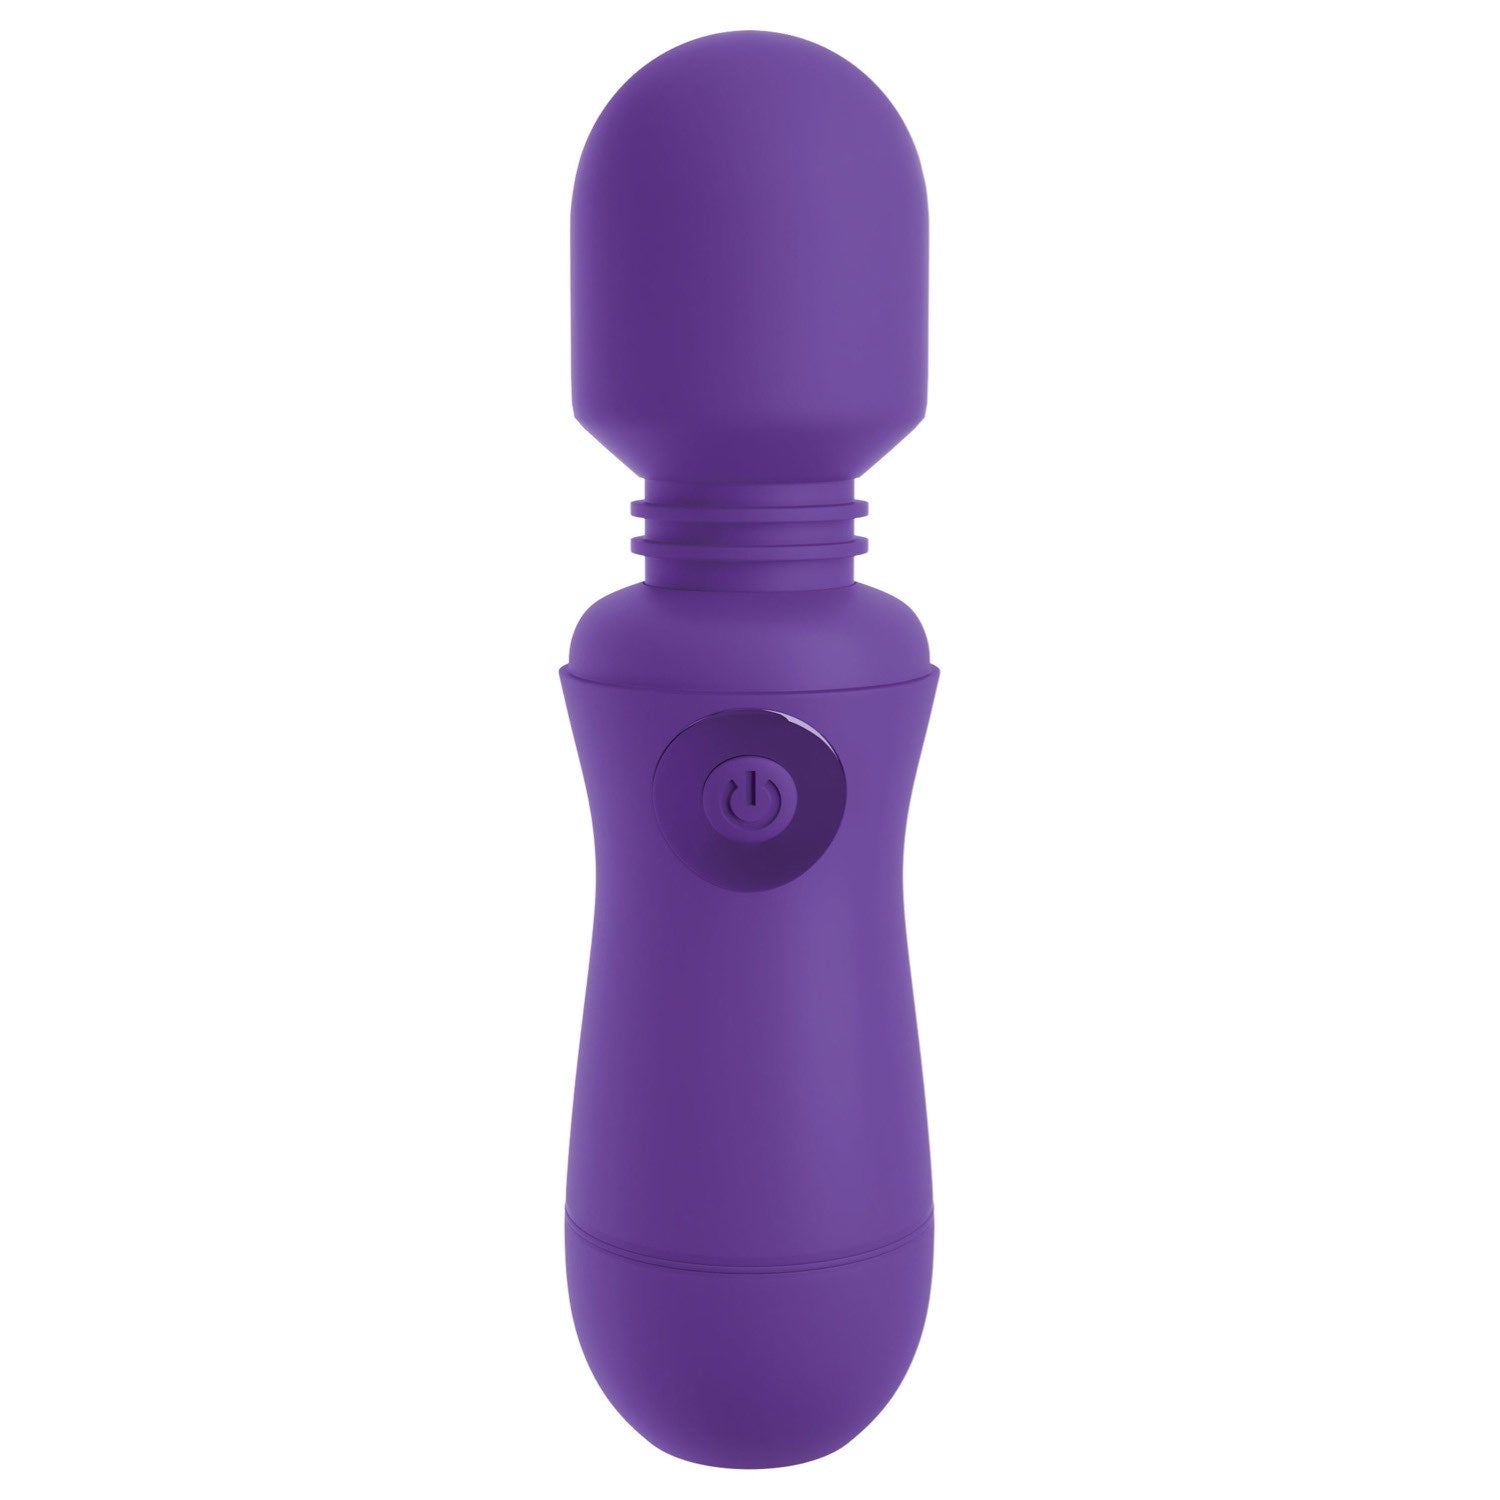 Omg! OMG! Wands #Enjoy - Purple USB Rechargeable Massager Wand by Pipedream